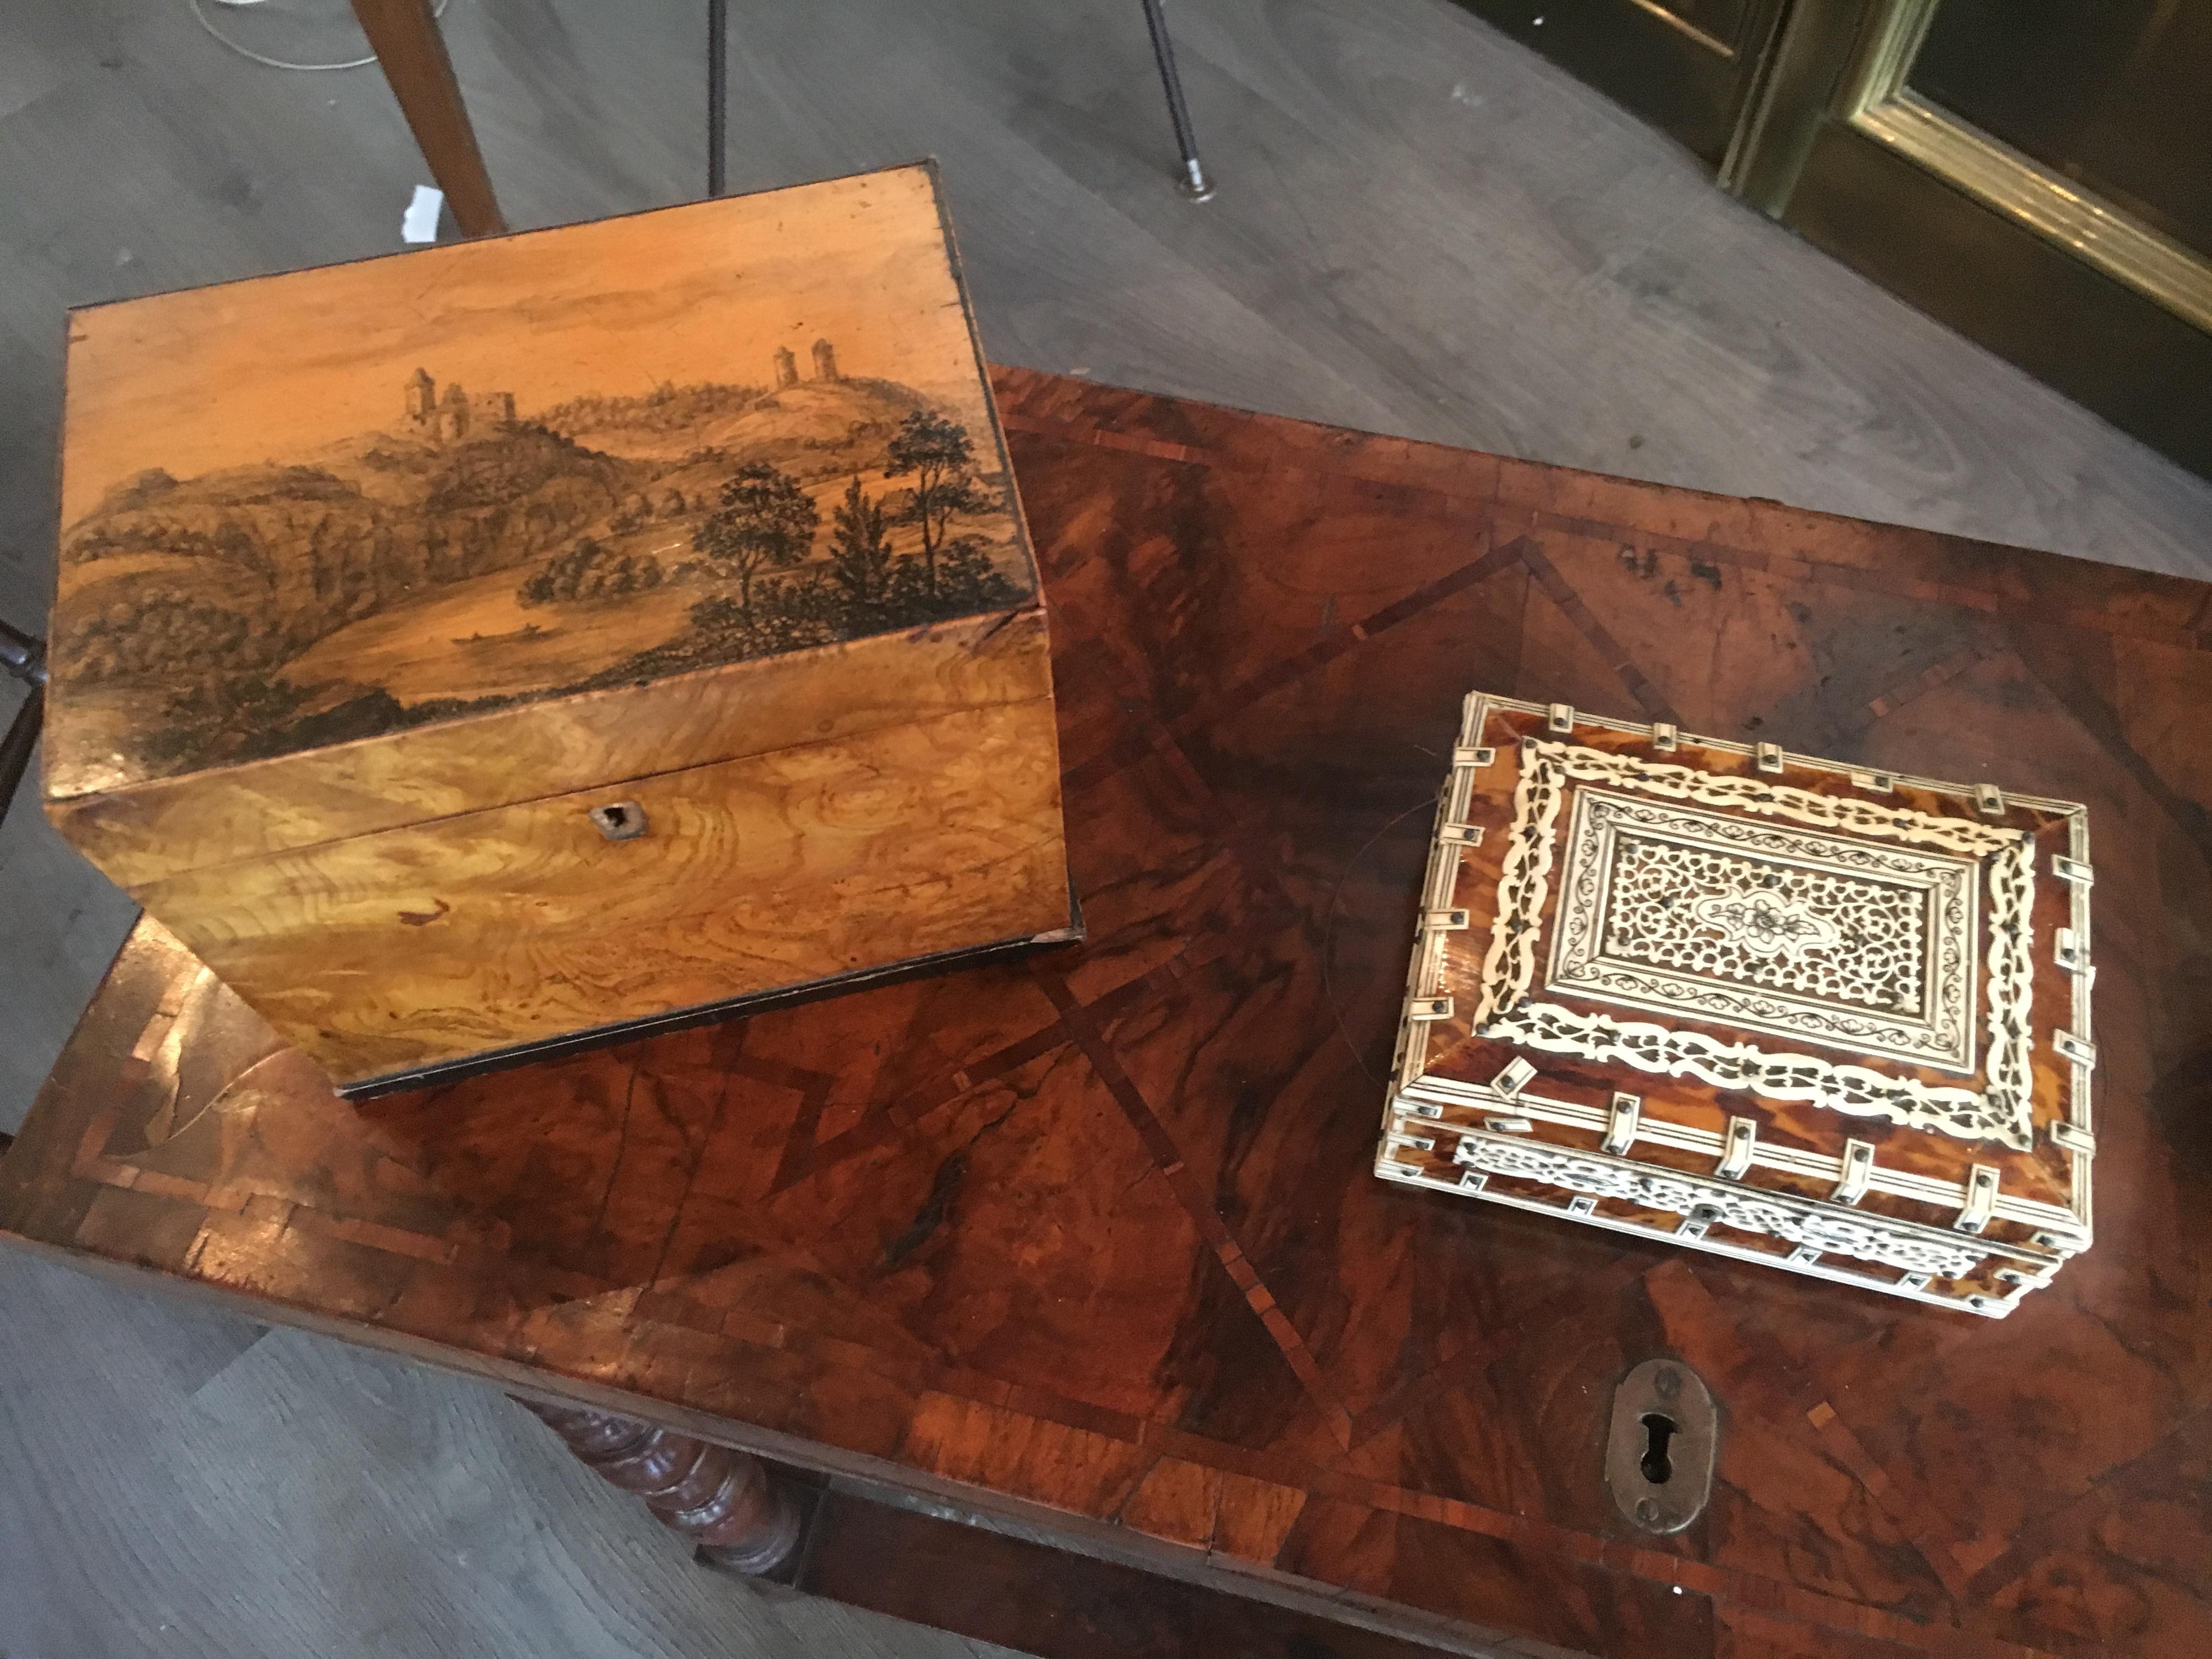 Tortoise shell decorative box with bun feet. We have other tortoise boxes similar in form that would be a lovely collection.  Feel free to call or email with questions.  Priced per box.  Compare the price of this box to other similar on 1stdibs.